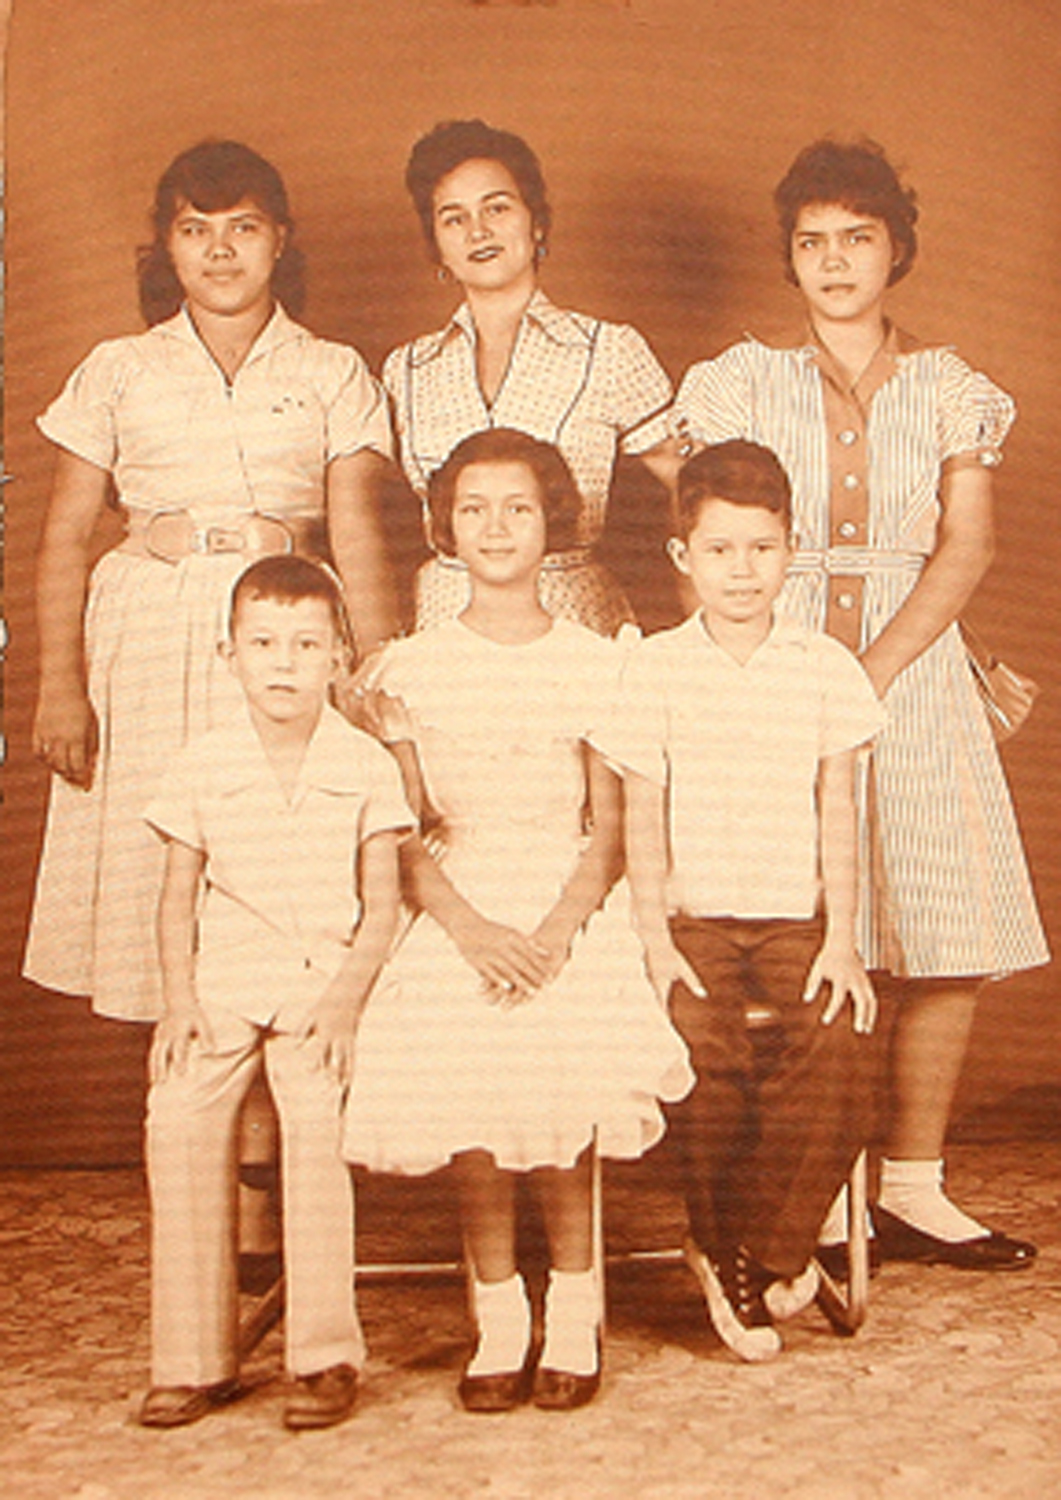 cornys_2_half_brothers_cecillight_pants_and_carlitos_quirino-_their_mother_is_middle_rear_with_their_half_sisters_